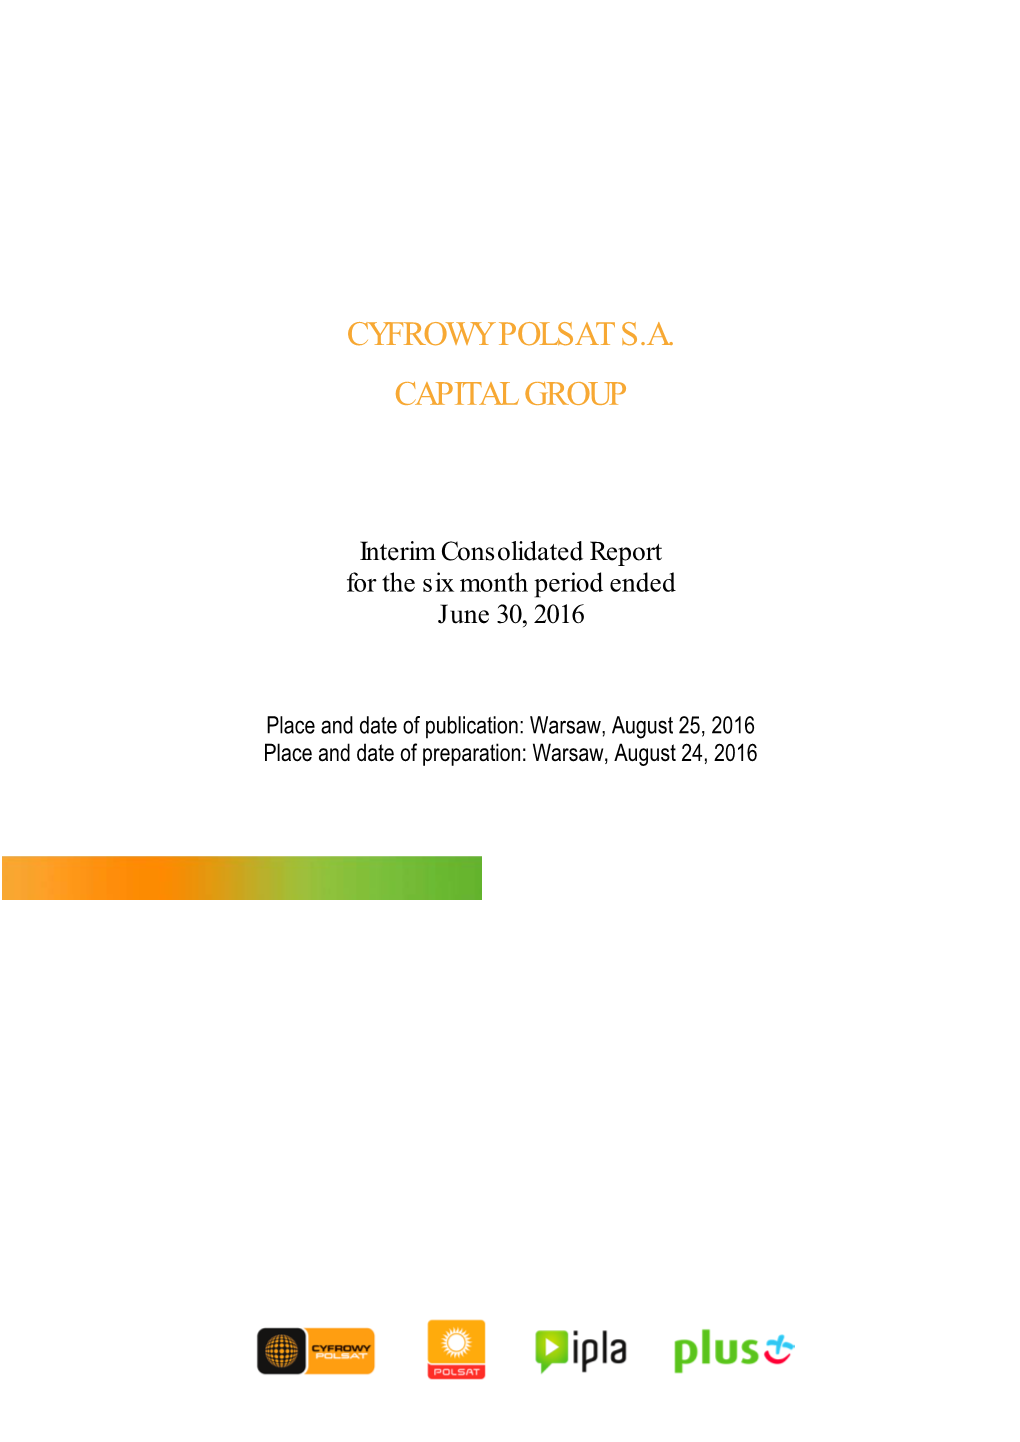 Consolidated Report for 1H 2016